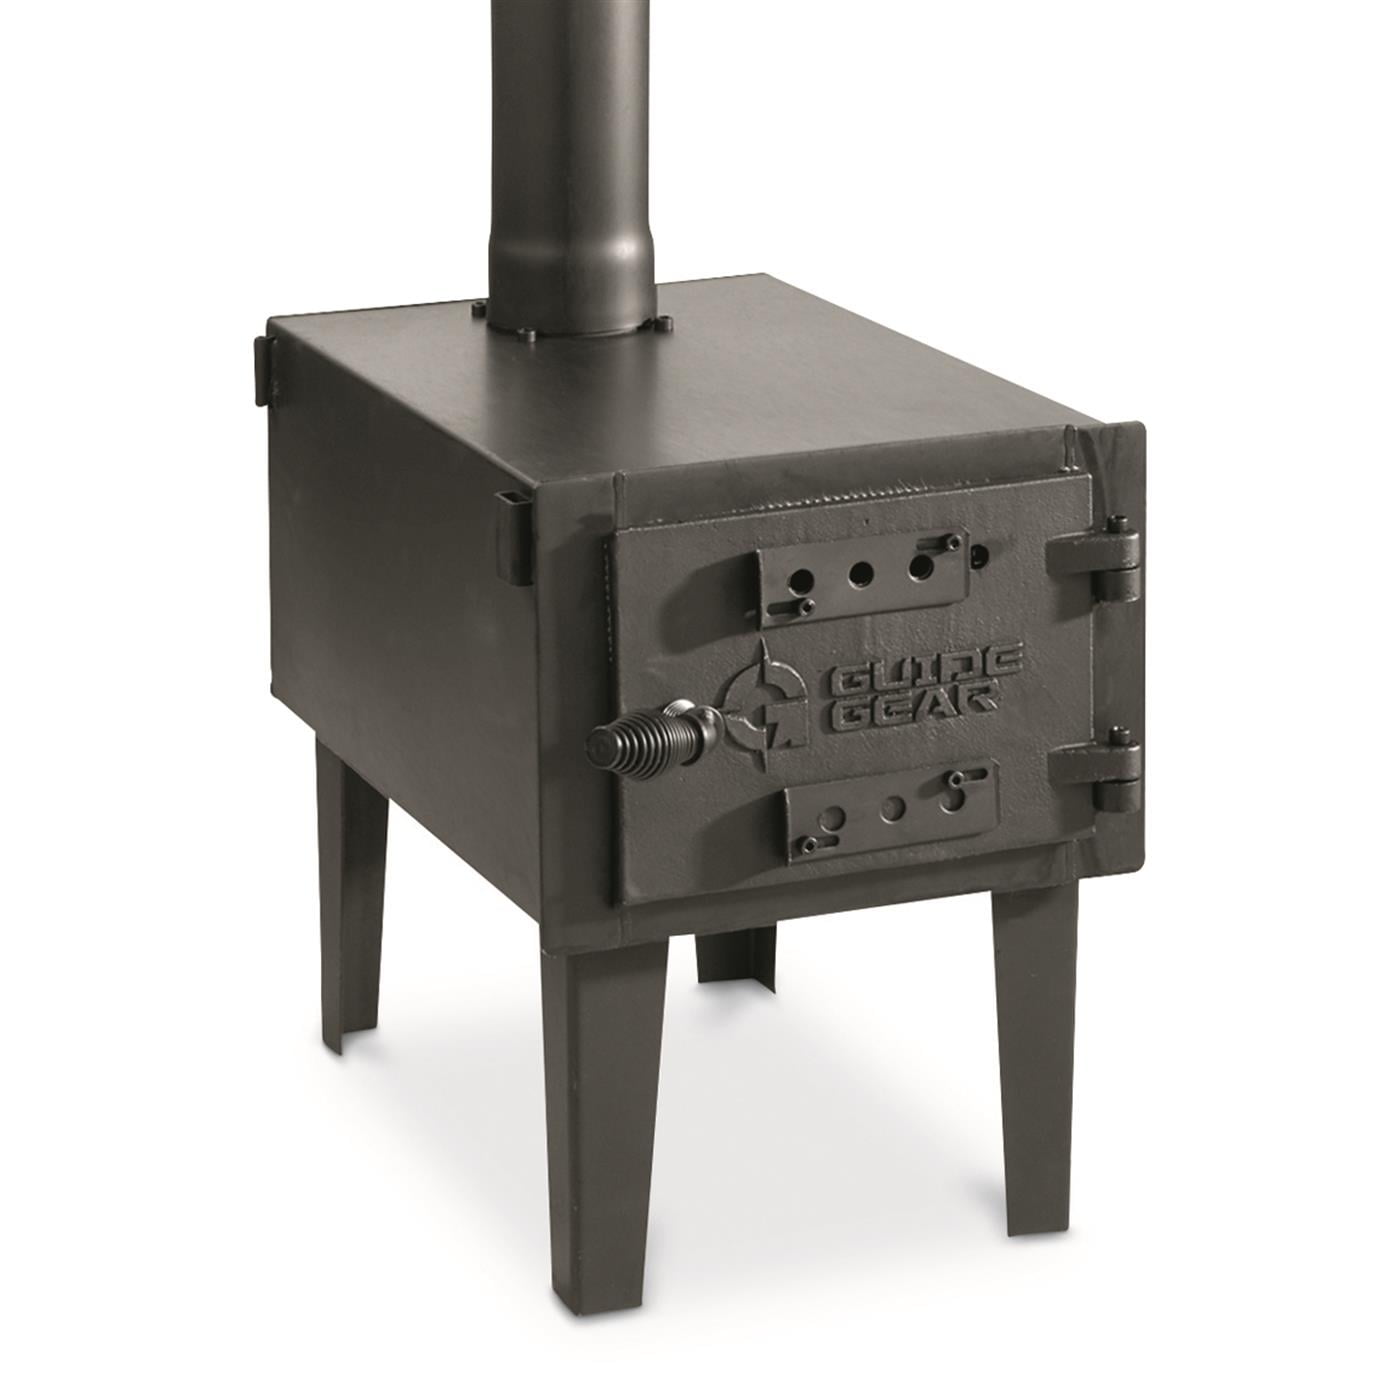 THE COMPLETE GUIDE TO WOOD-BURNING STOVES